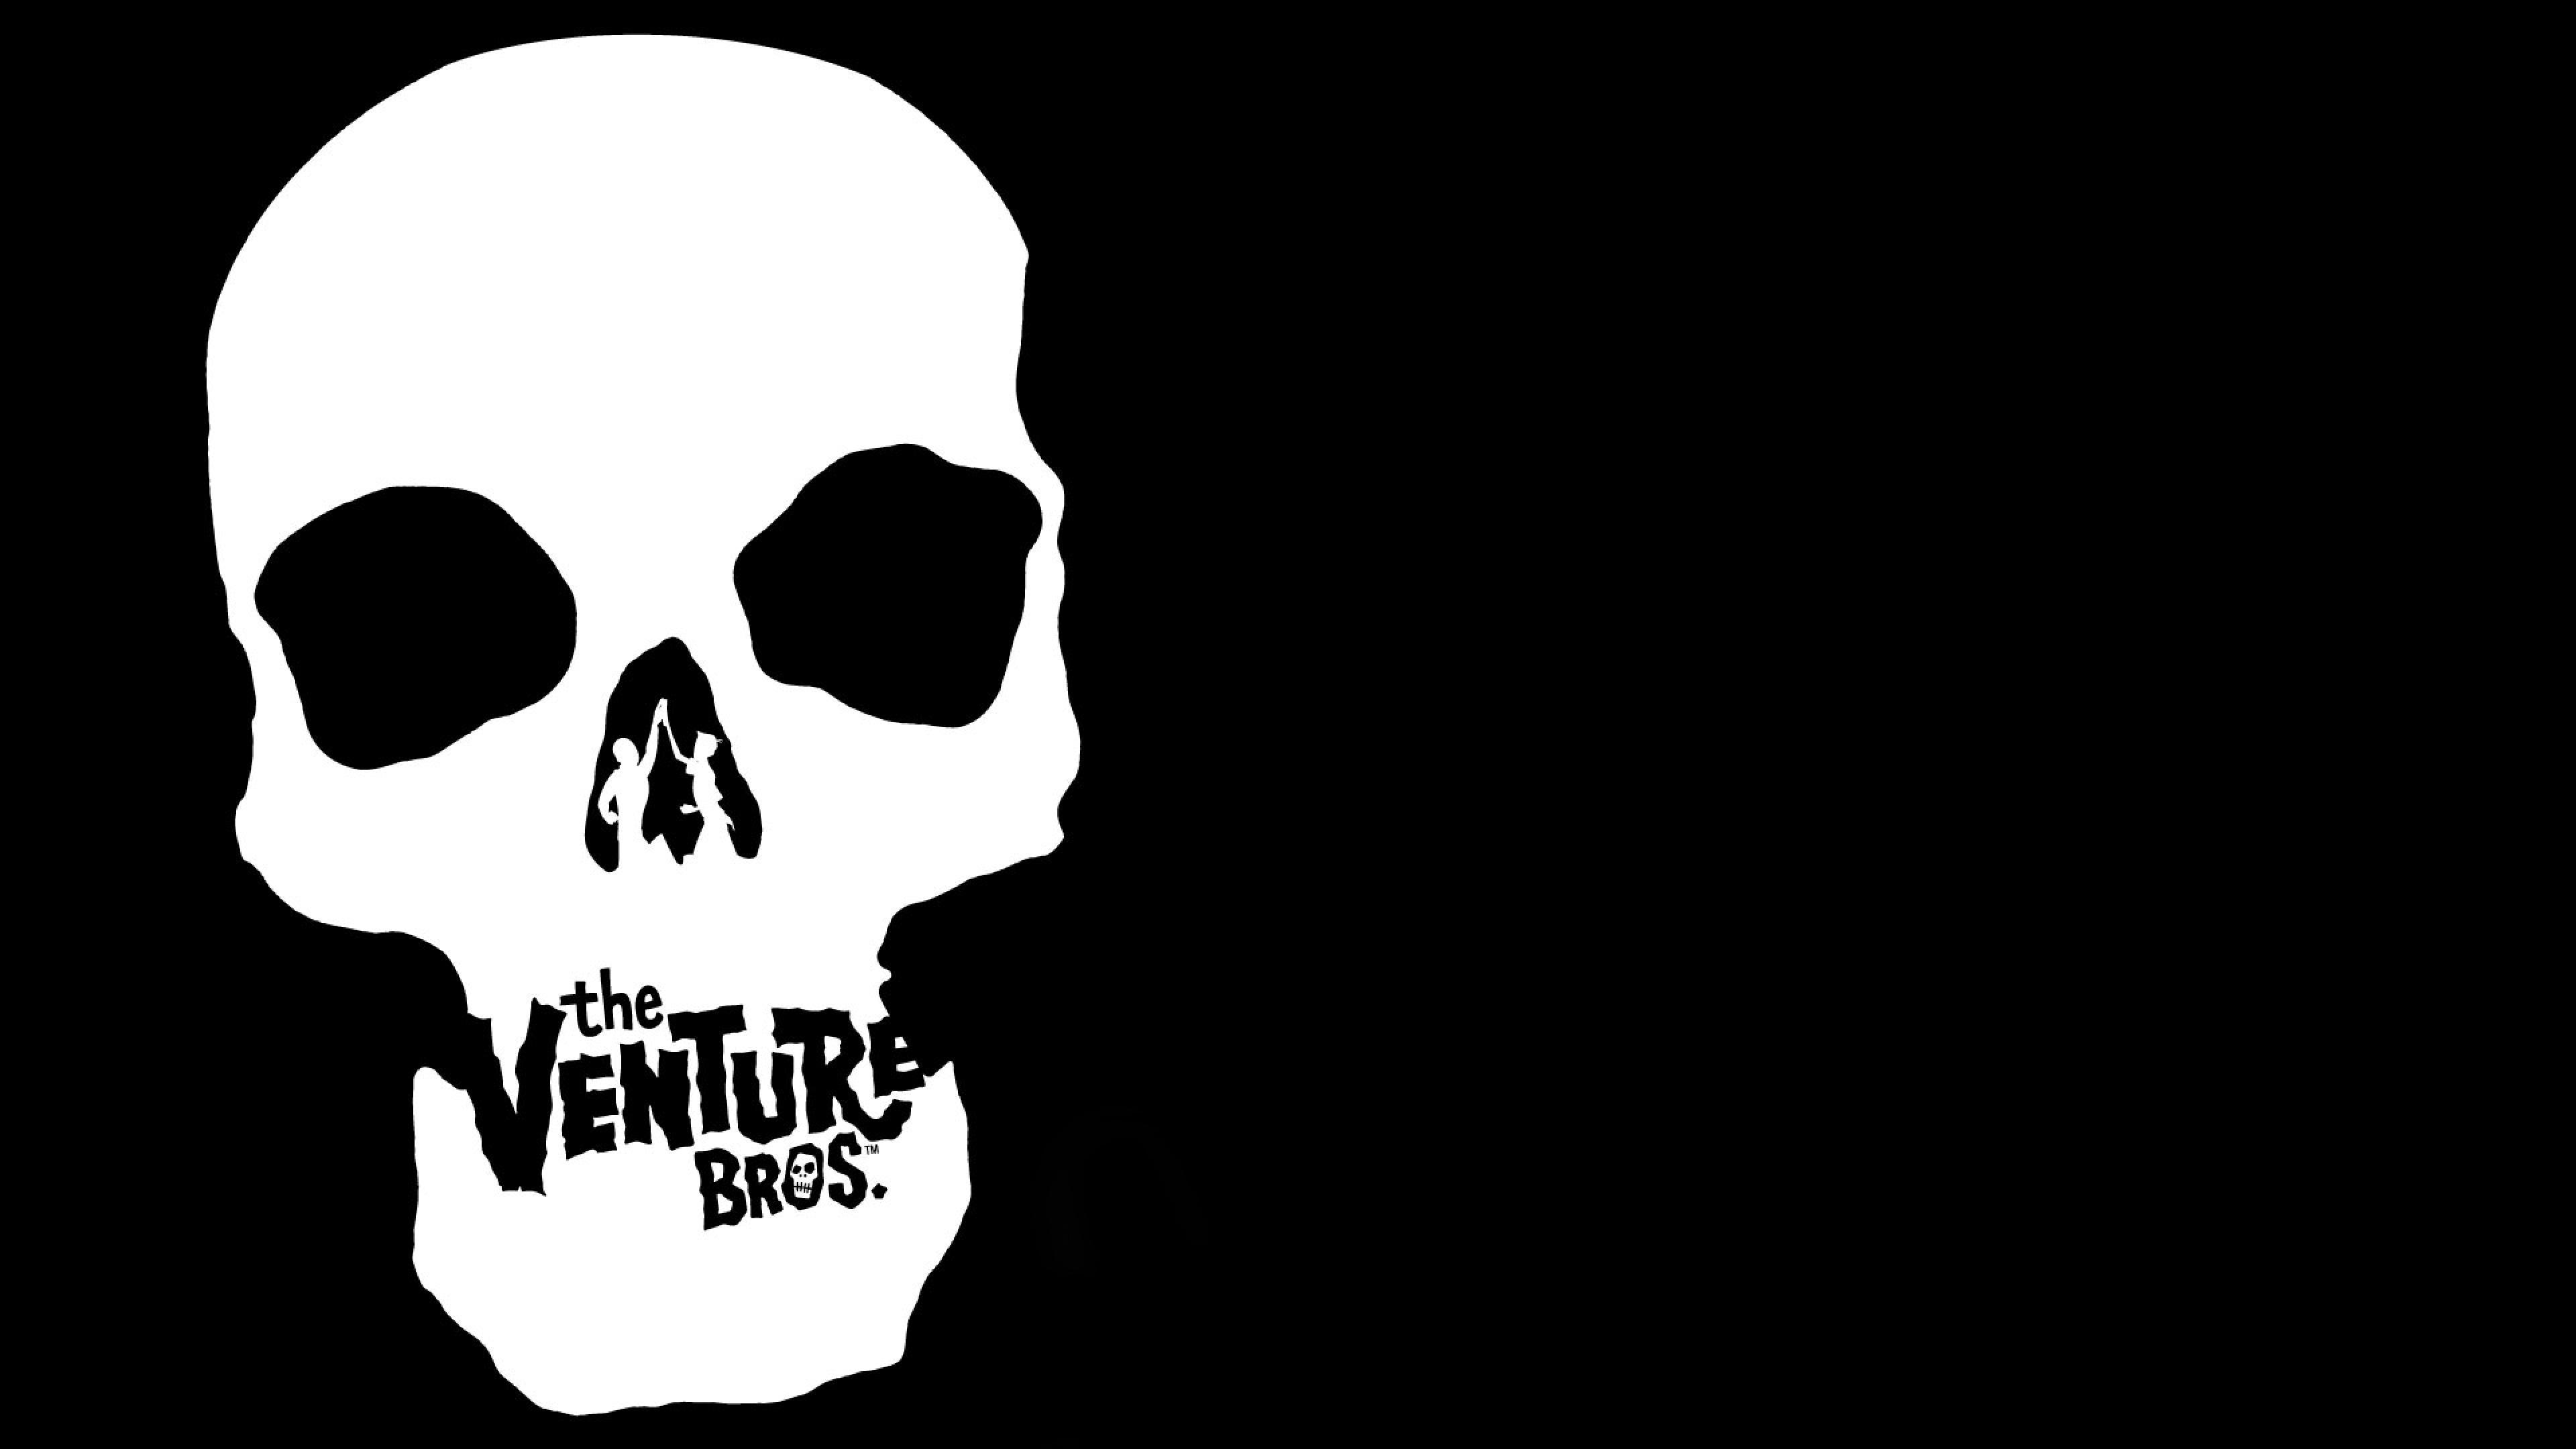 Wallpaper Blink of Venture Bros Wallpaper HD for Android